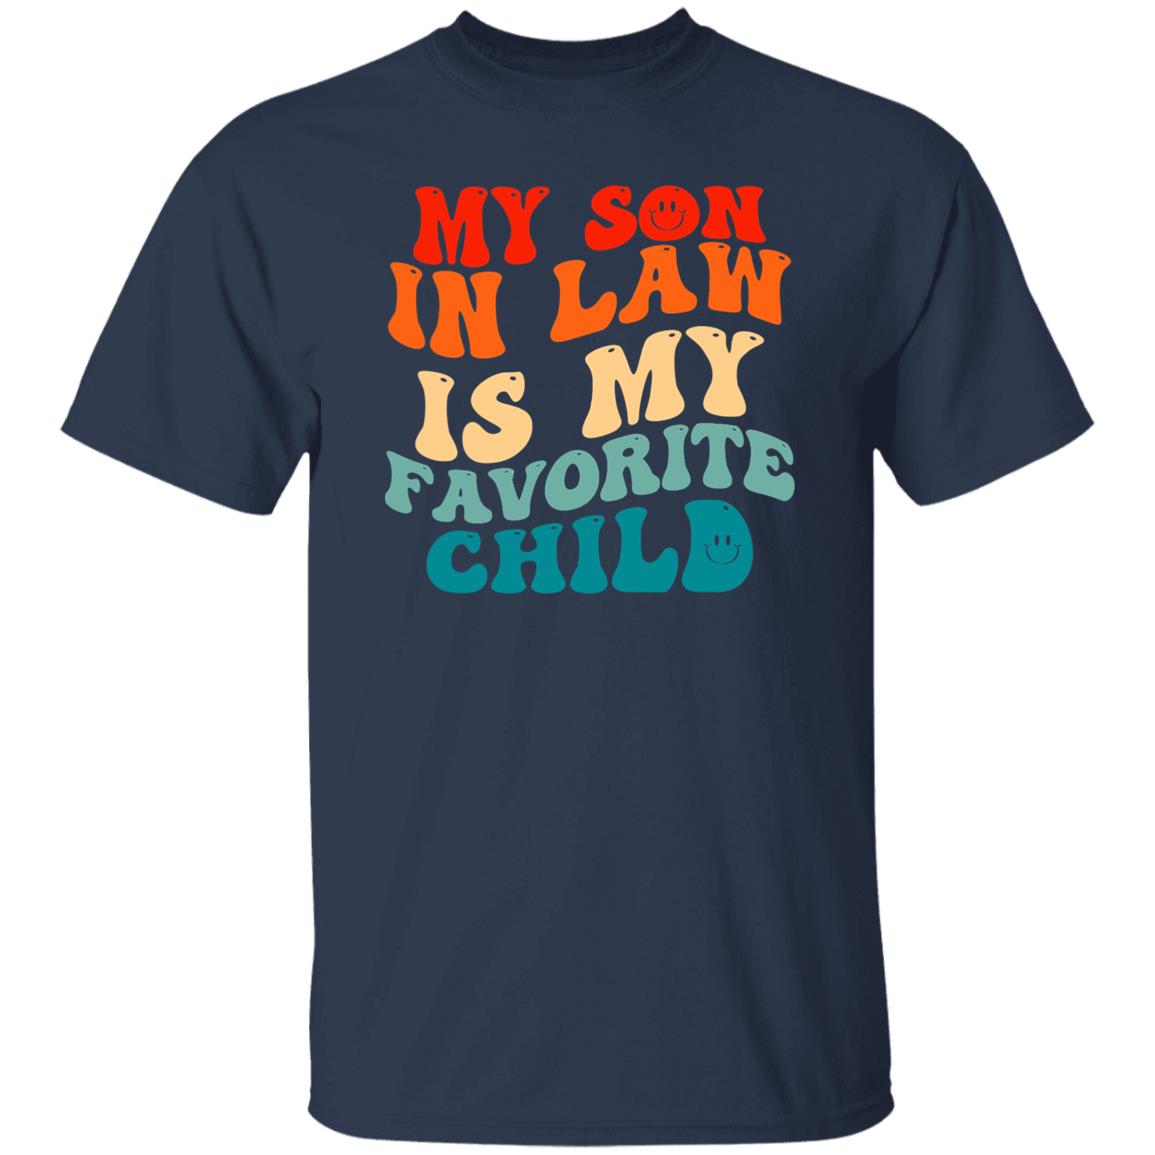 My Son In Law Is My Favorite Child Funny Family Humor Groovy Shirt